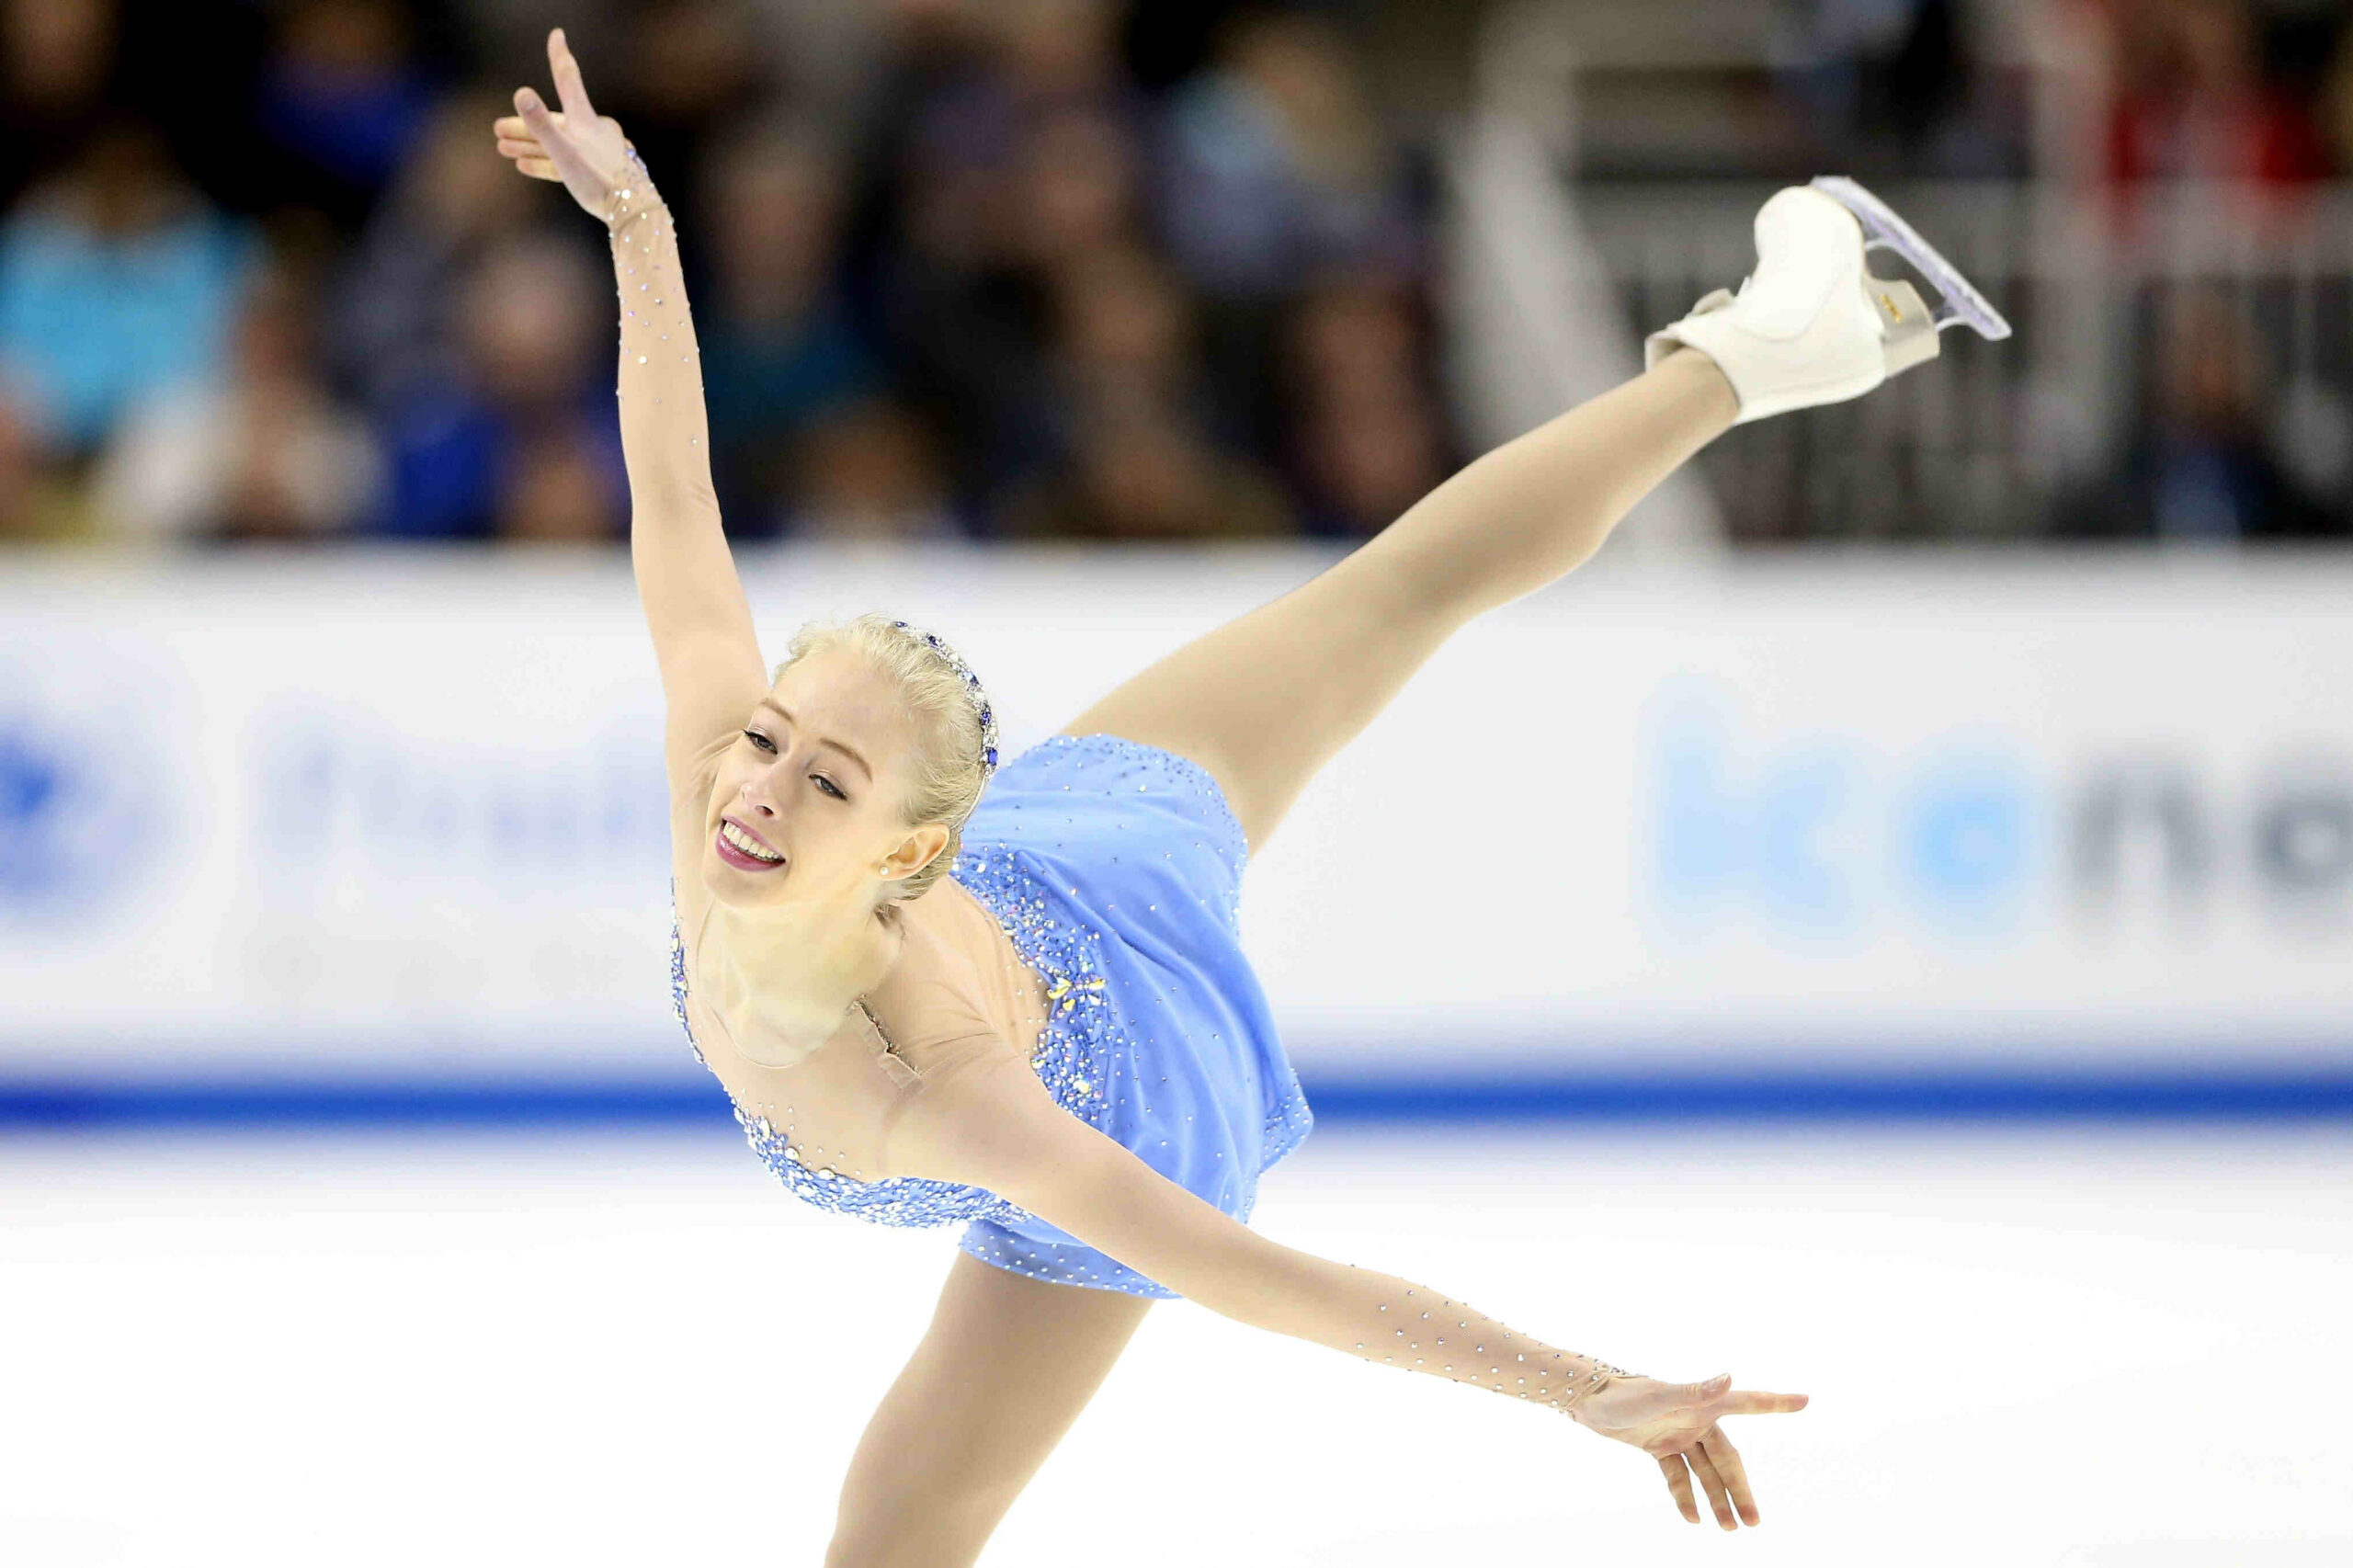 Is figure skating an expensive sport?